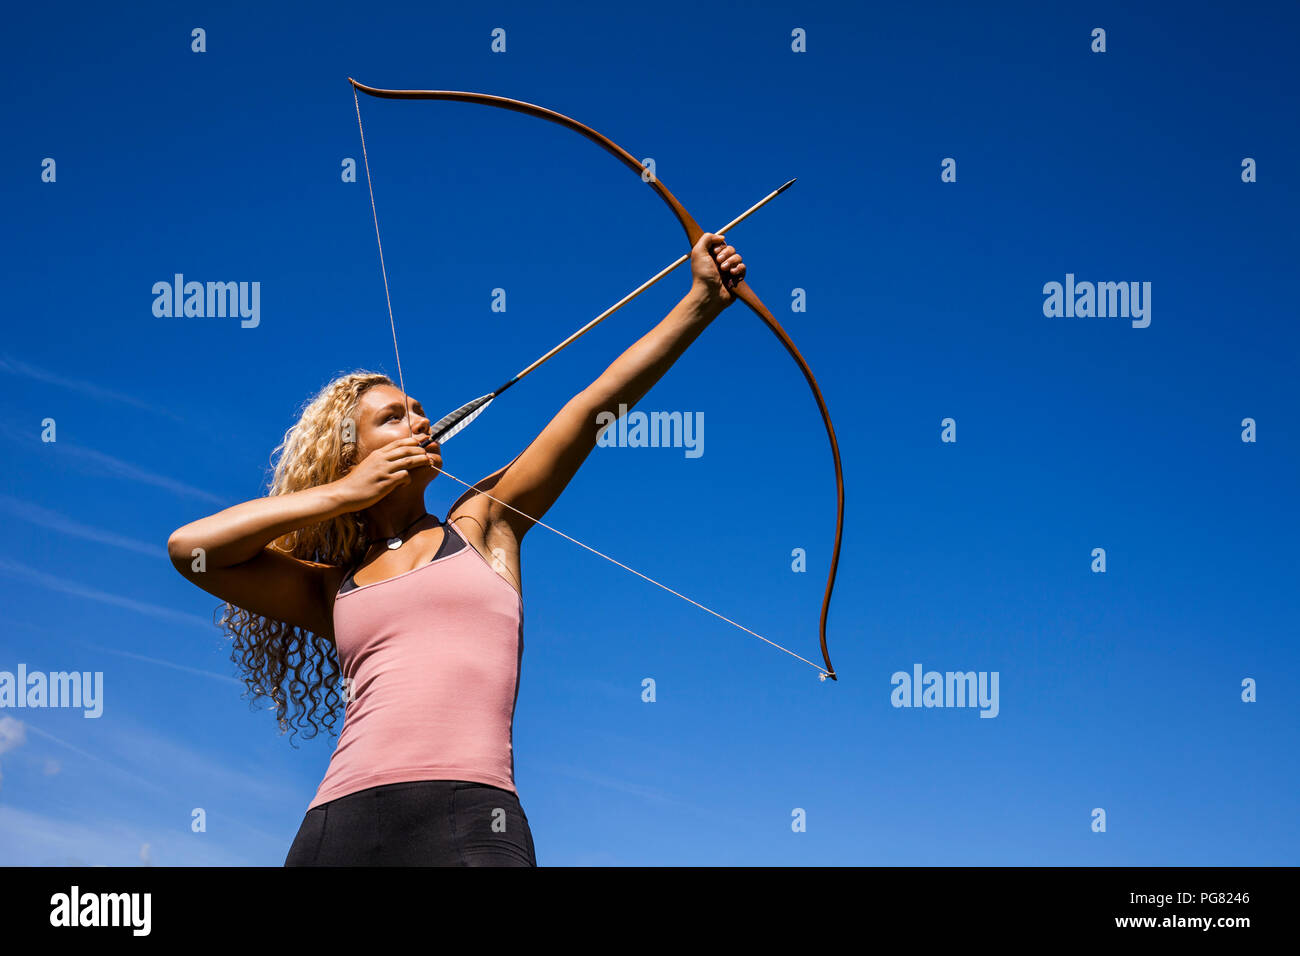 Archeress aiming with bow against blue sky Stock Photo